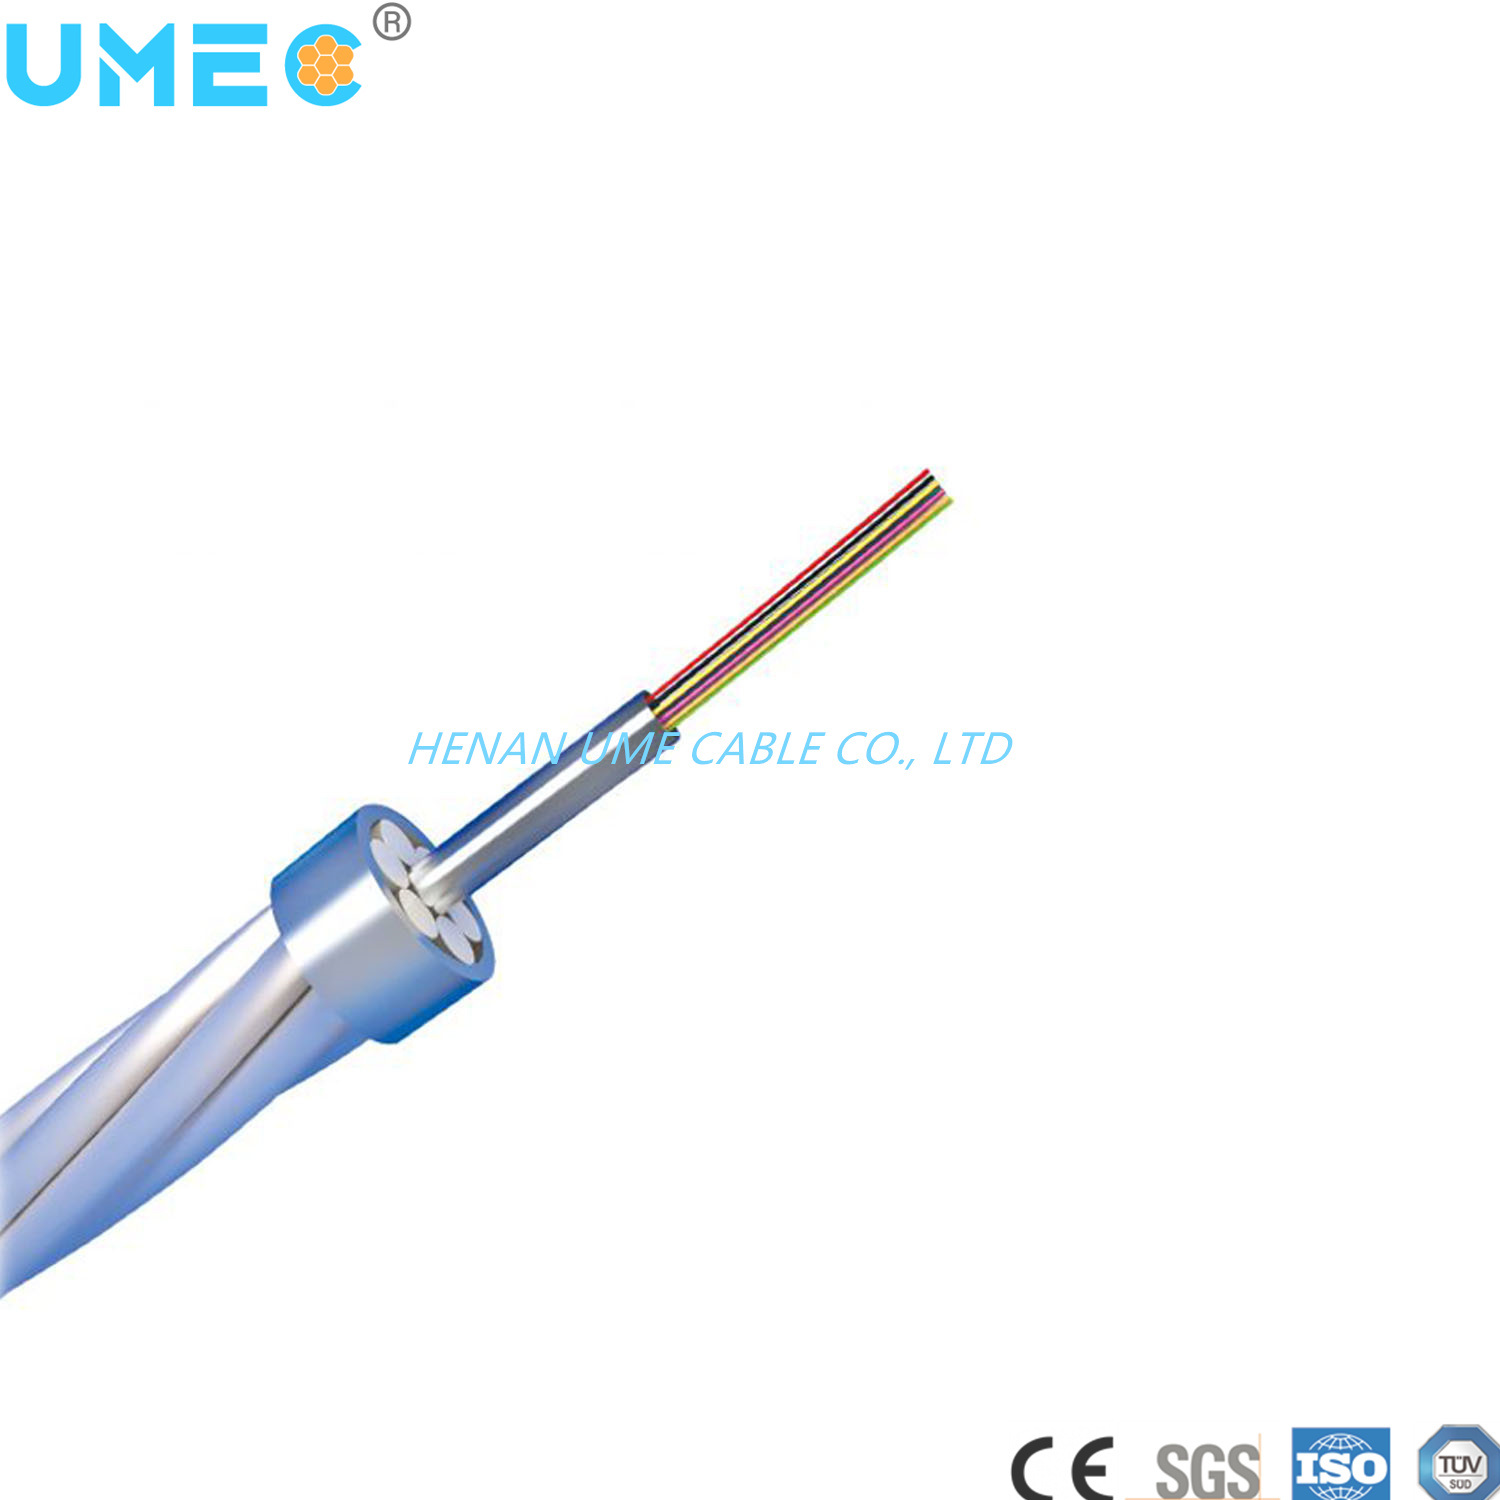 Transmission Line Optical Ground Cable Opgw